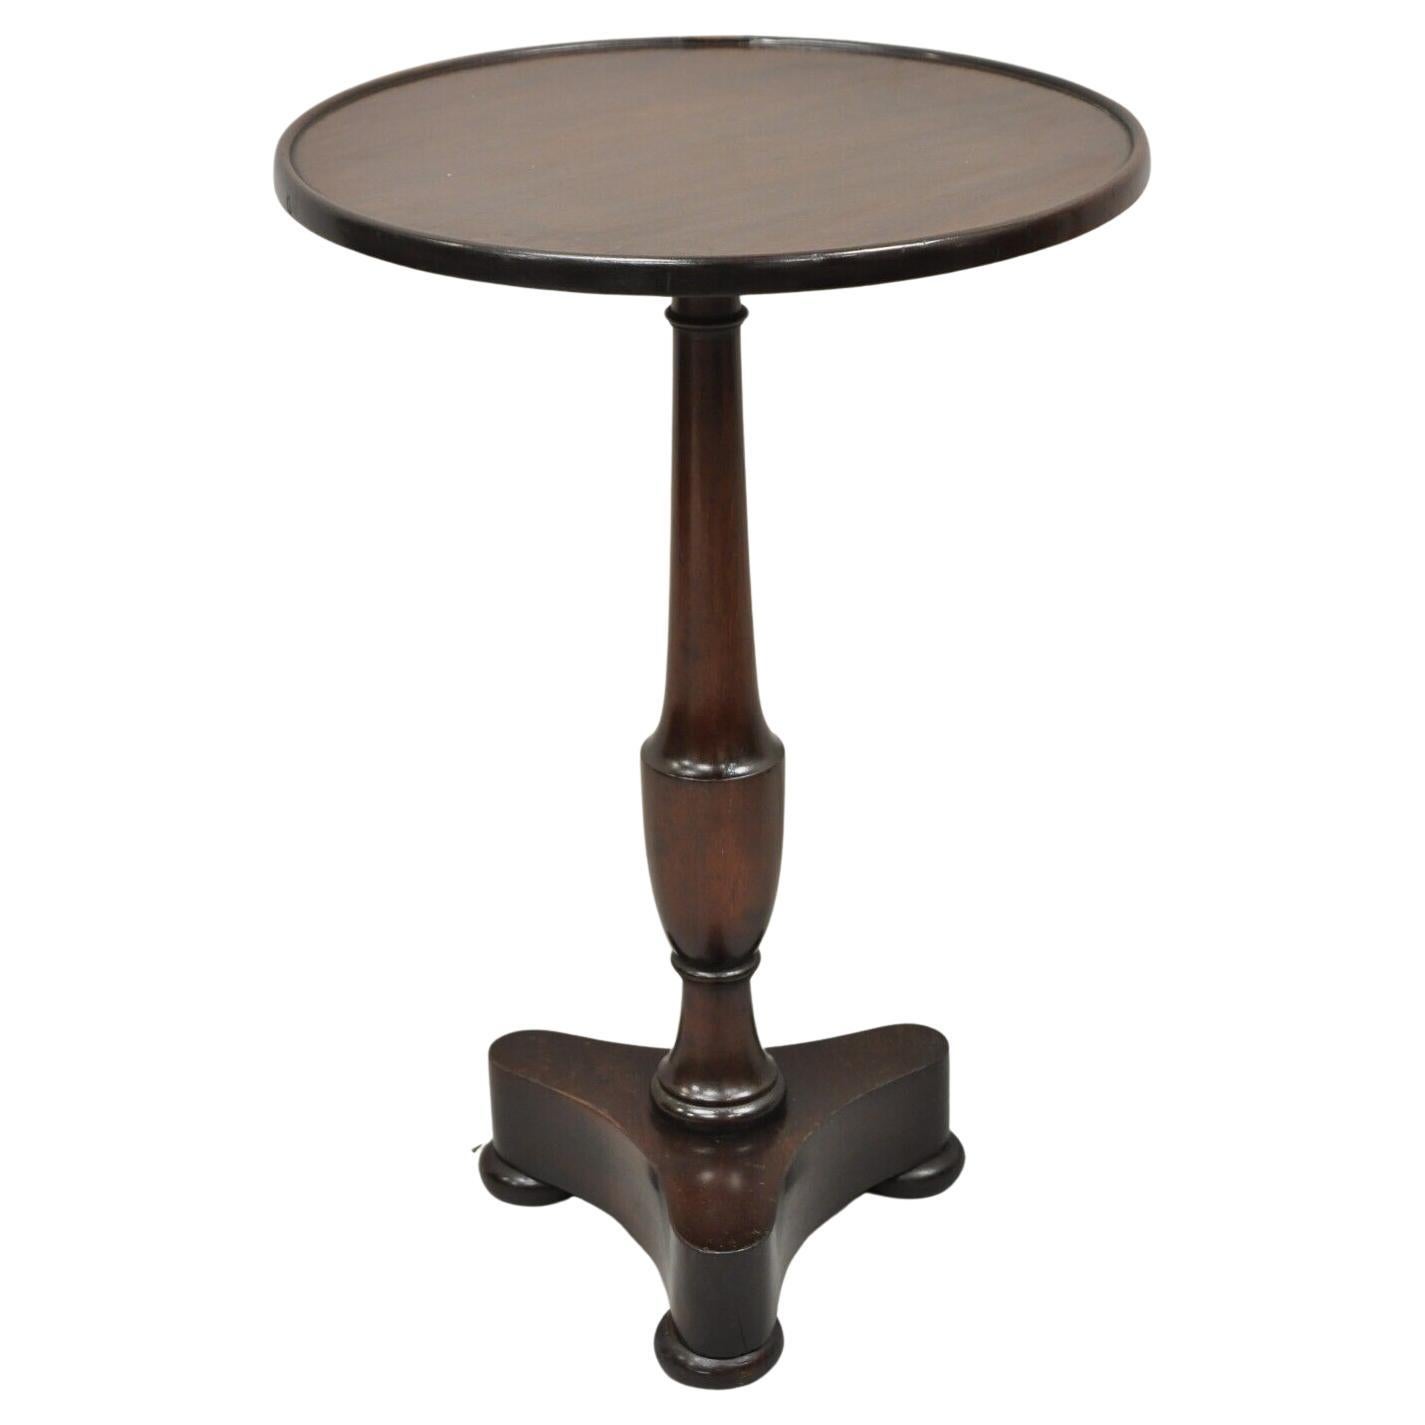 Antique Mahogany Small Empire Pedestal Base Round Accent Side Table